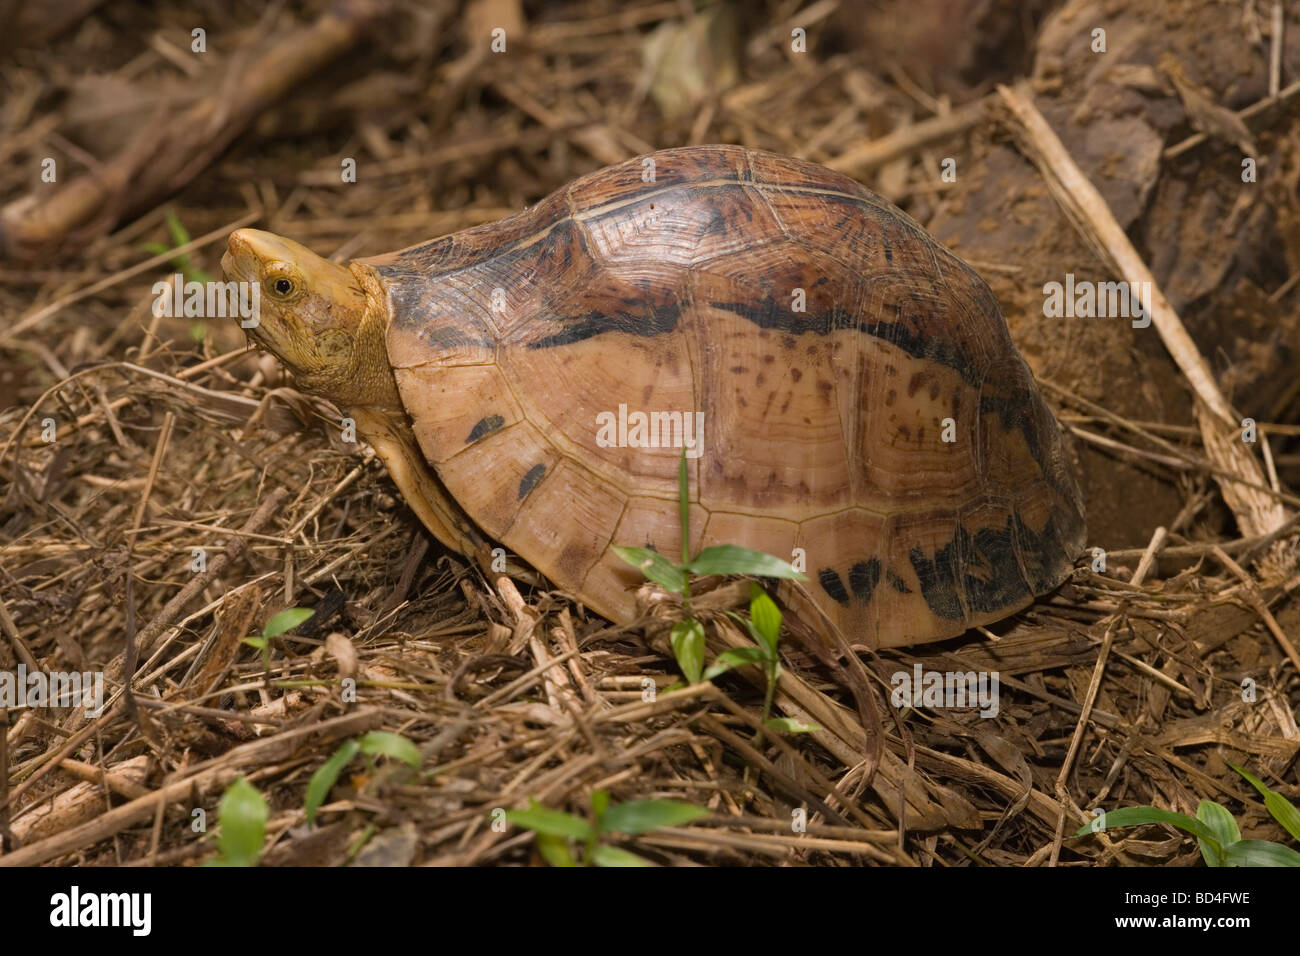 Indochinese Flowerback Box Turtle (Cuora galbinifrons). Head emerging from between upper and lowered shell, or plastron, opening. Stock Photo